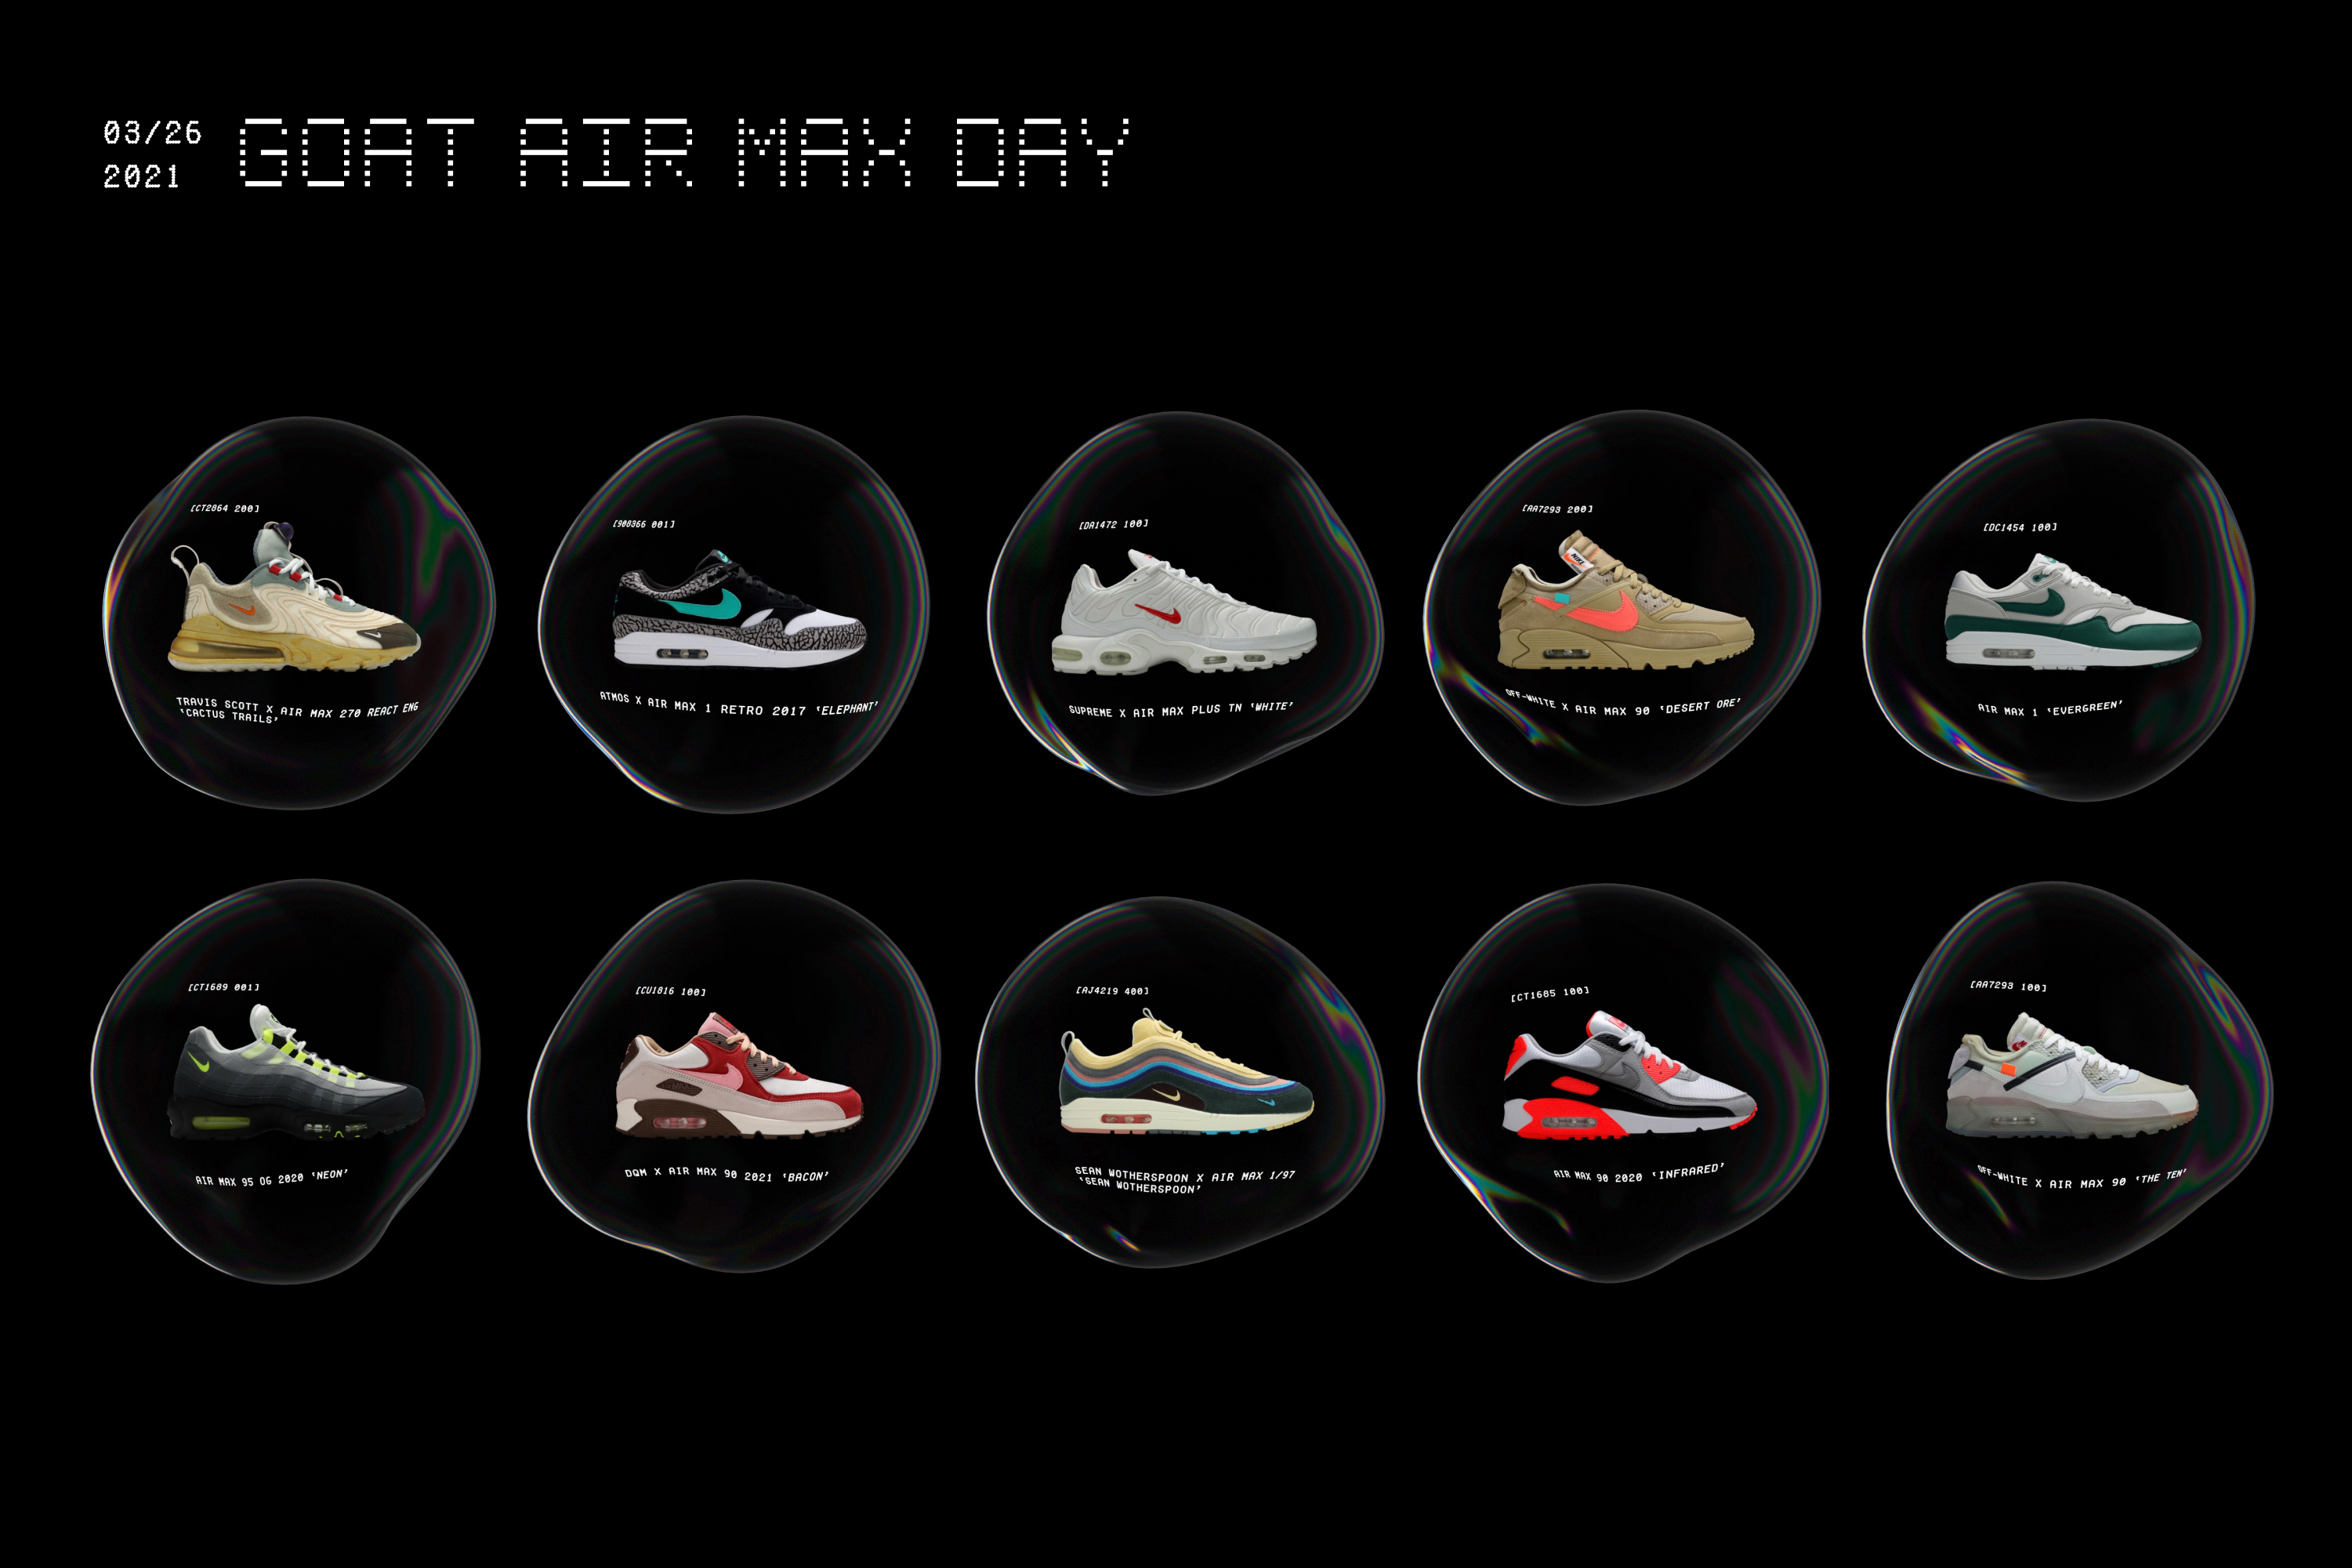 GOAT Is GIving Away Rare Sneakers for Black Friday